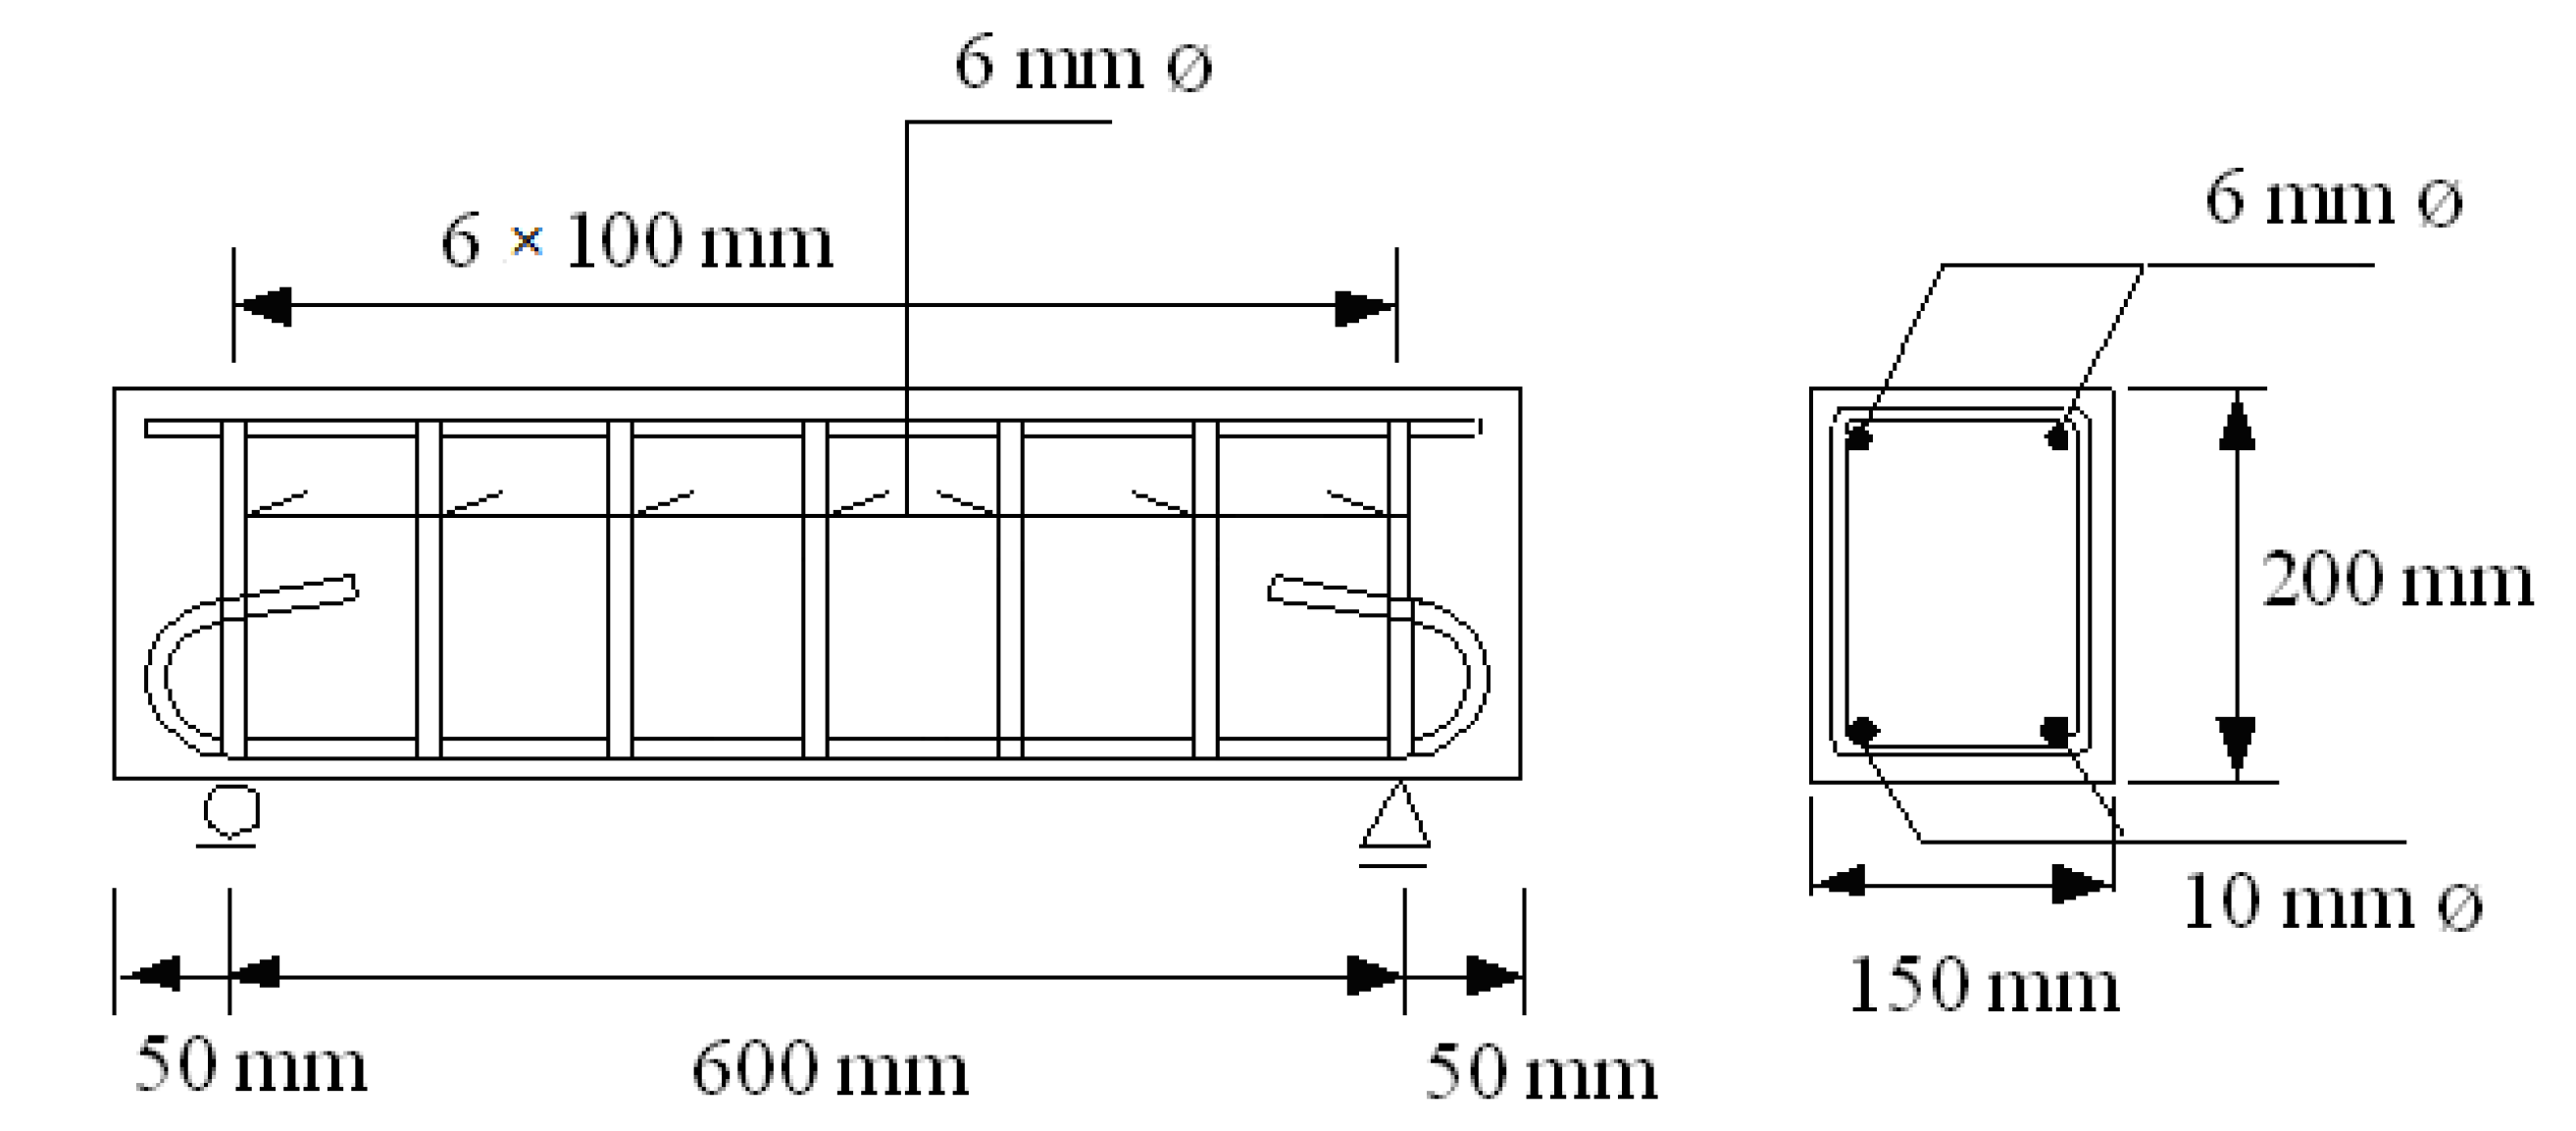 bar designs and dimensions